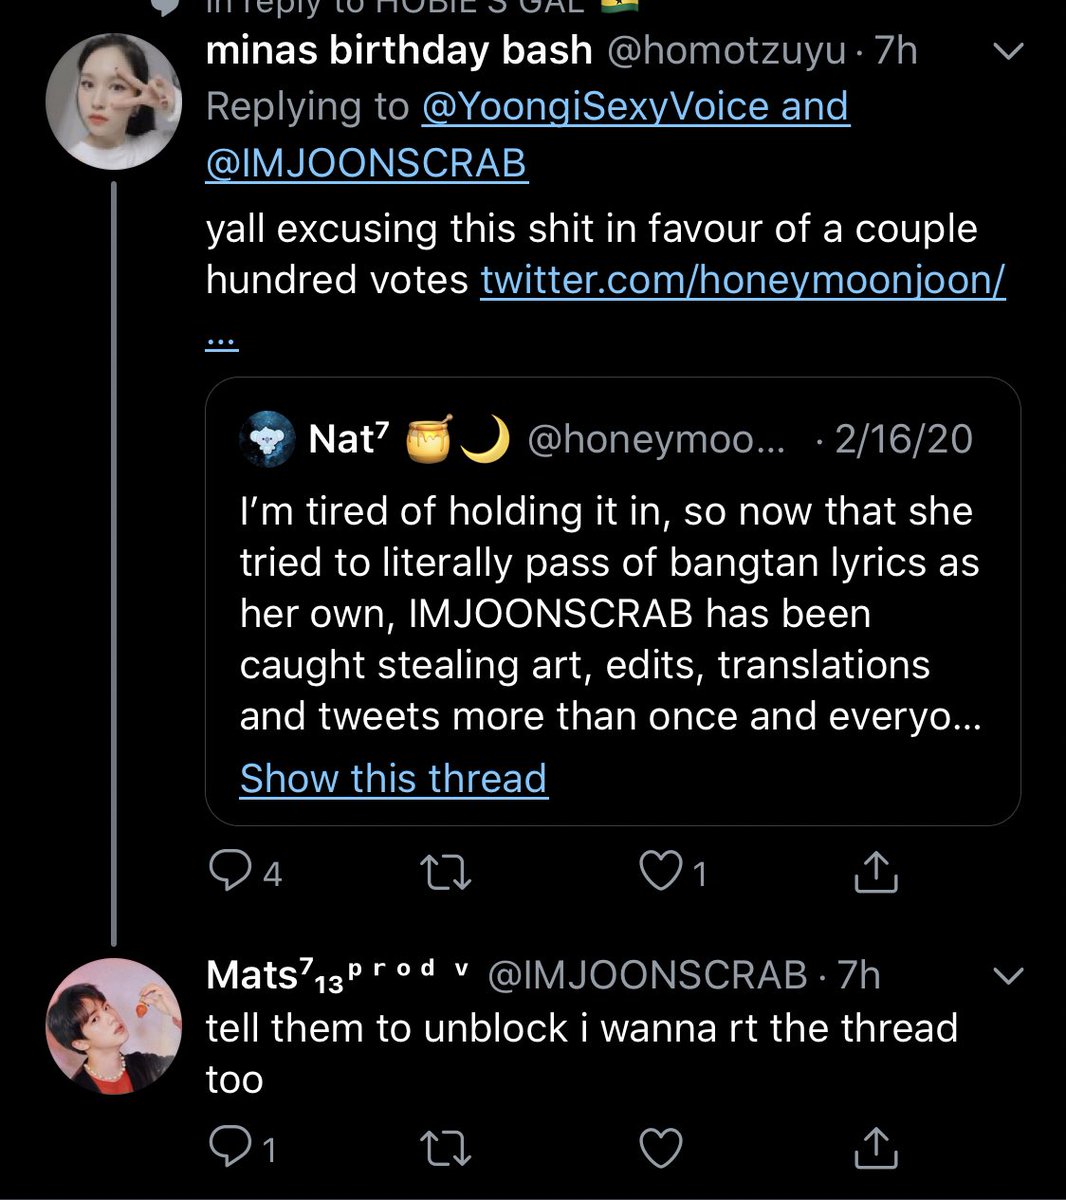 Lol “tell them to unblock, I want to RT the thread” as if you didn’t ALREADY quote this exact thread and BLOCK ME before you did it so I wouldn’t know lmao come on, Aya. I know you can’t keep up with your lies, but this was just last month!!